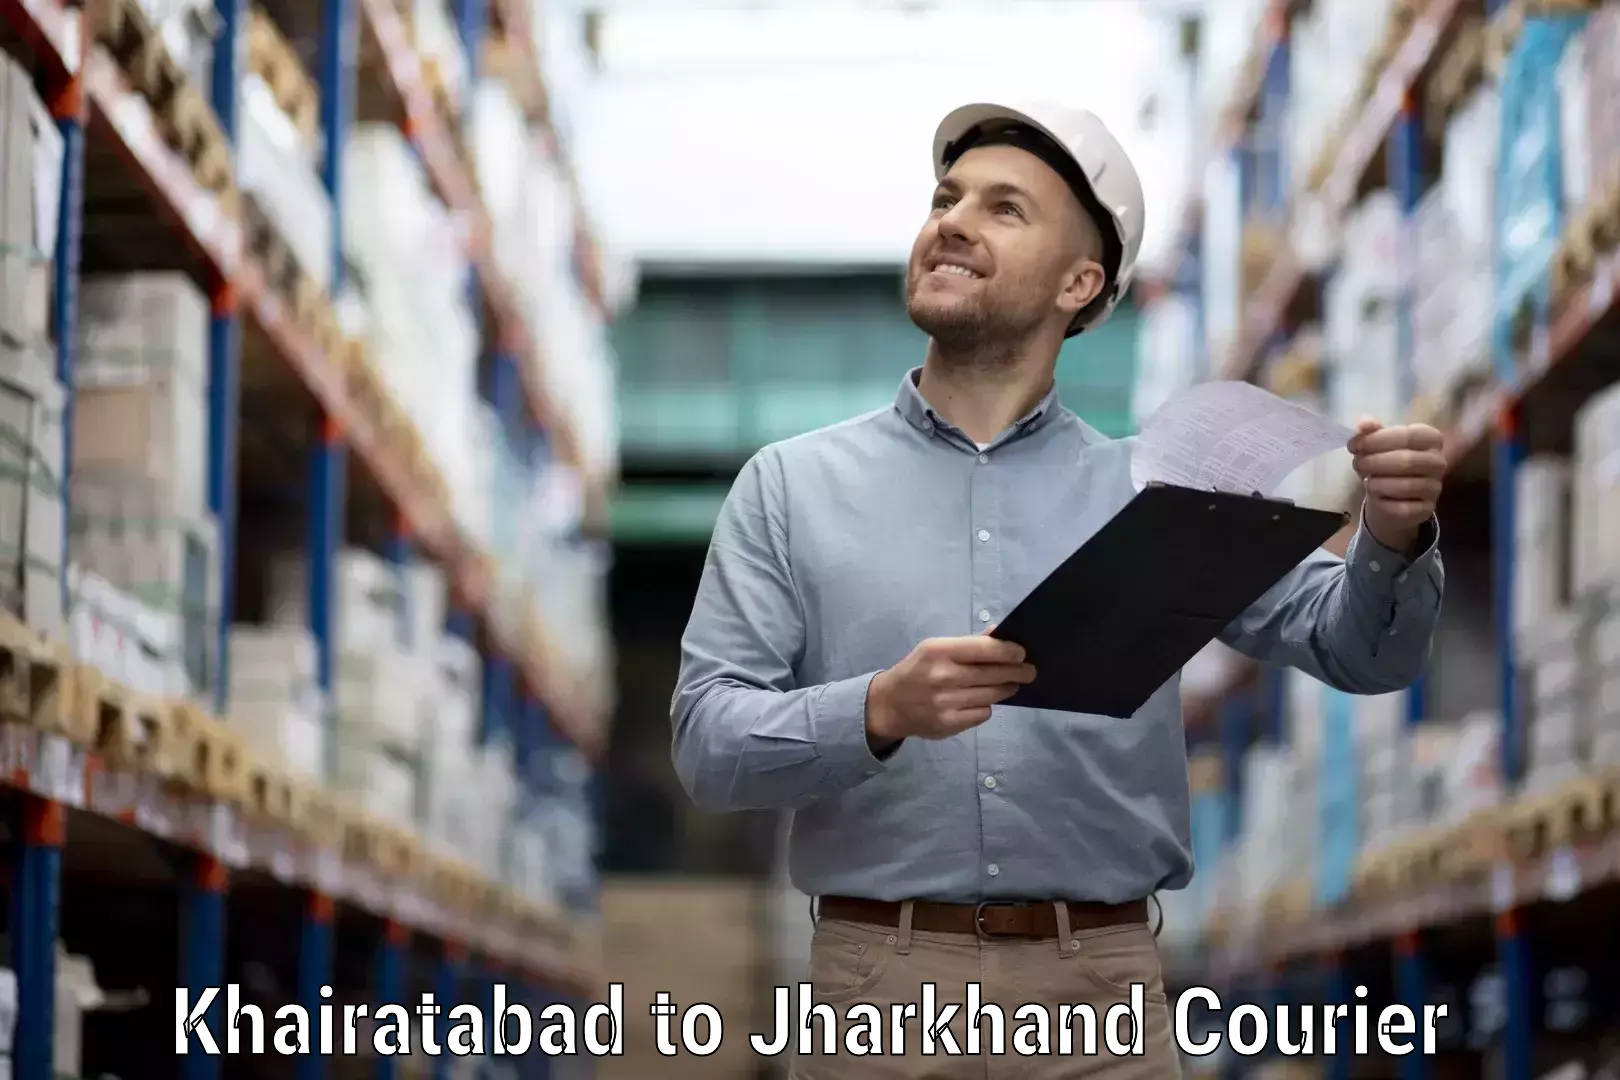 Efficient order fulfillment Khairatabad to Chatra